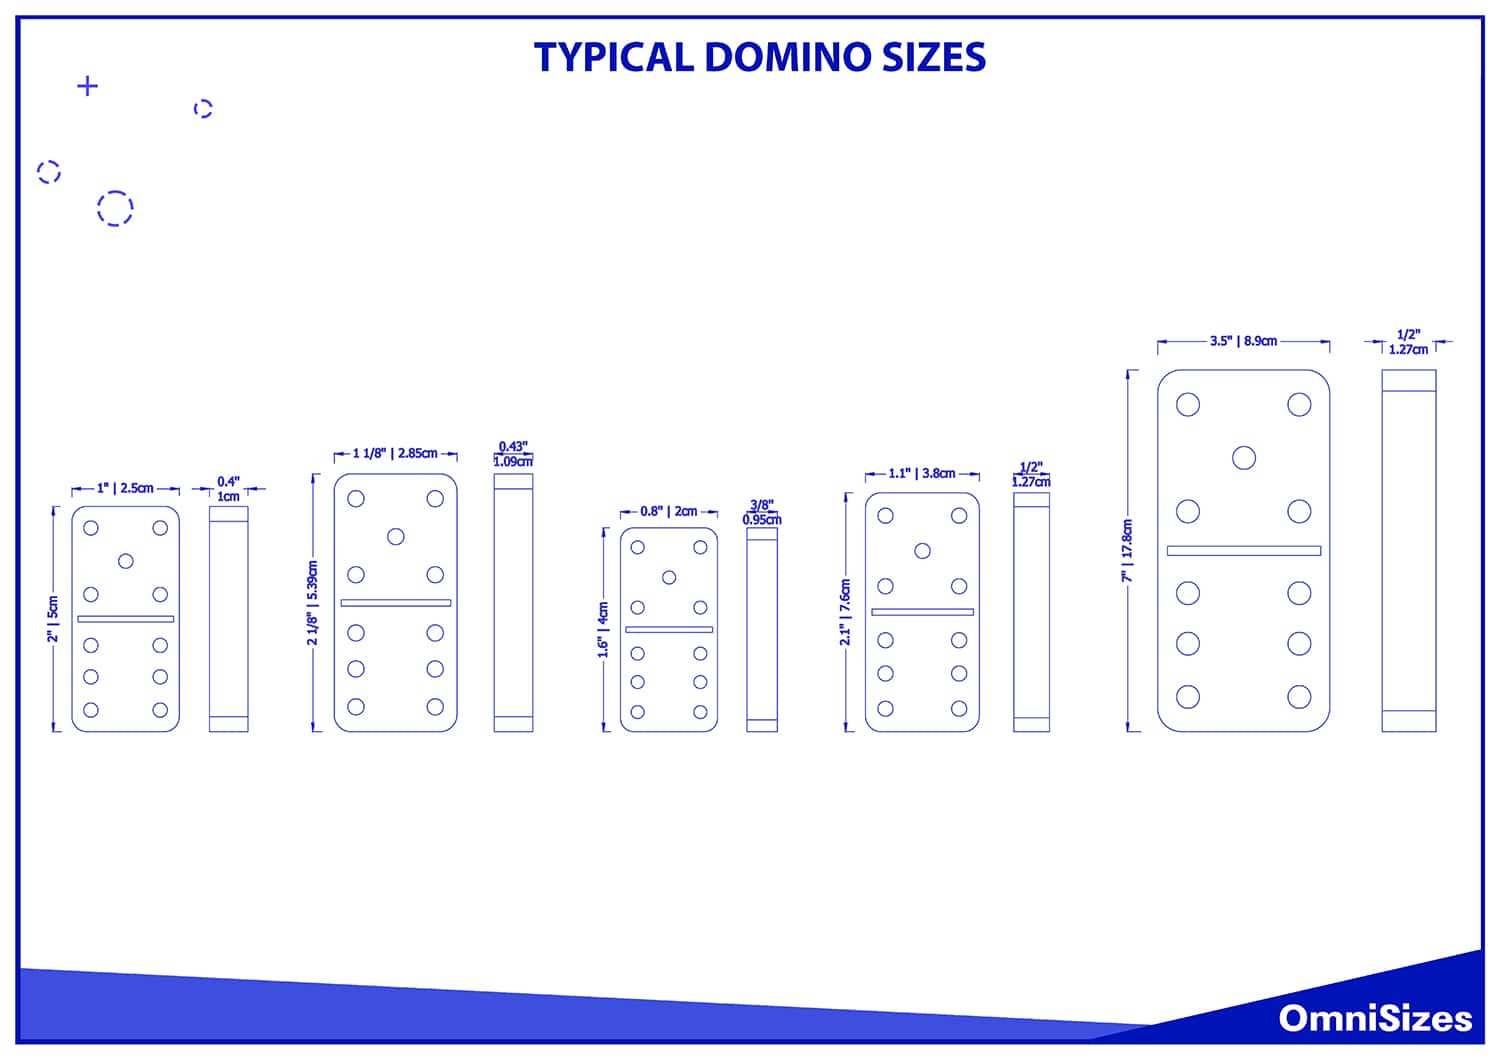 Typical domino sizes